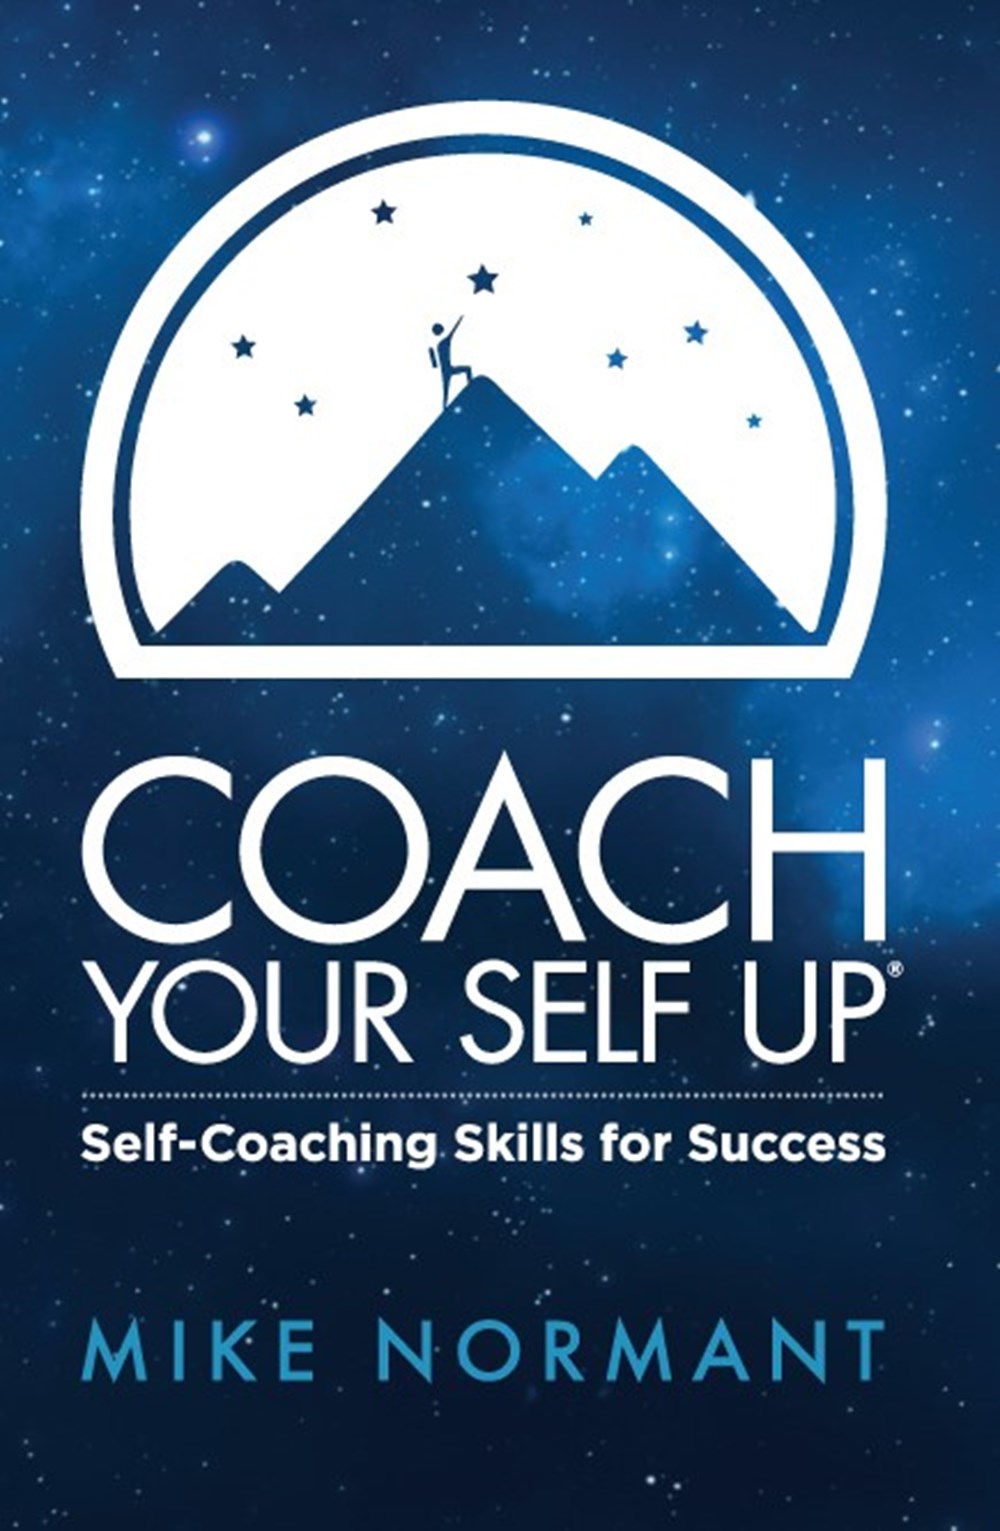 Coach Your Self Up Self-Coaching Skills for Success